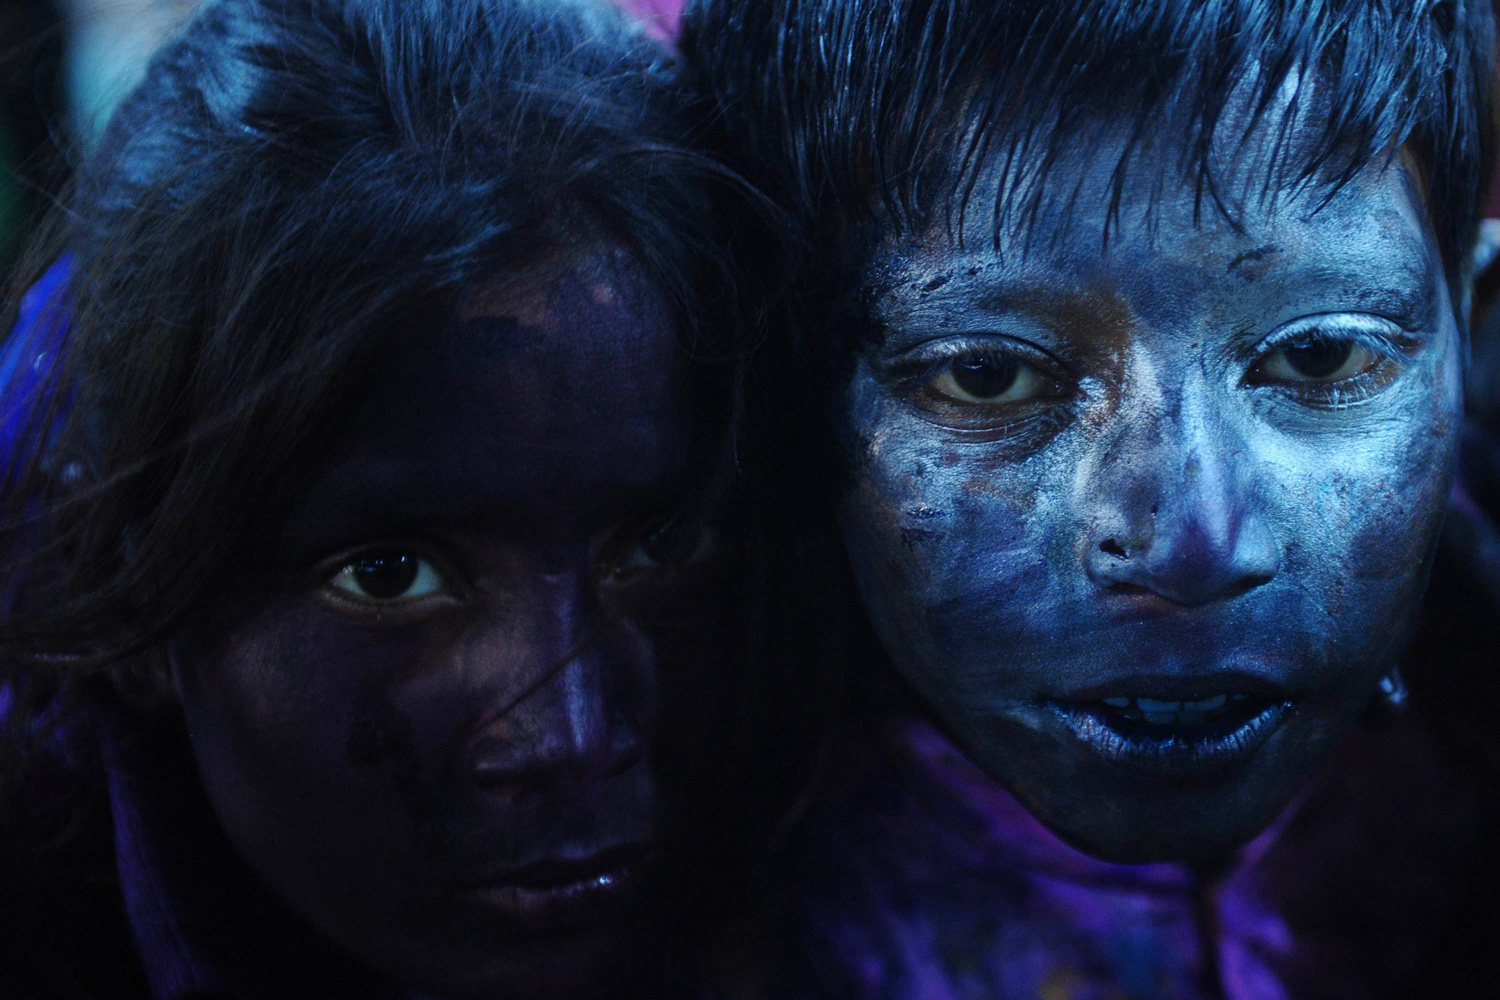 March 7, 2012. Pakistani Hindus pose for a photograph during the celebration of the Holi festival in Karachi.